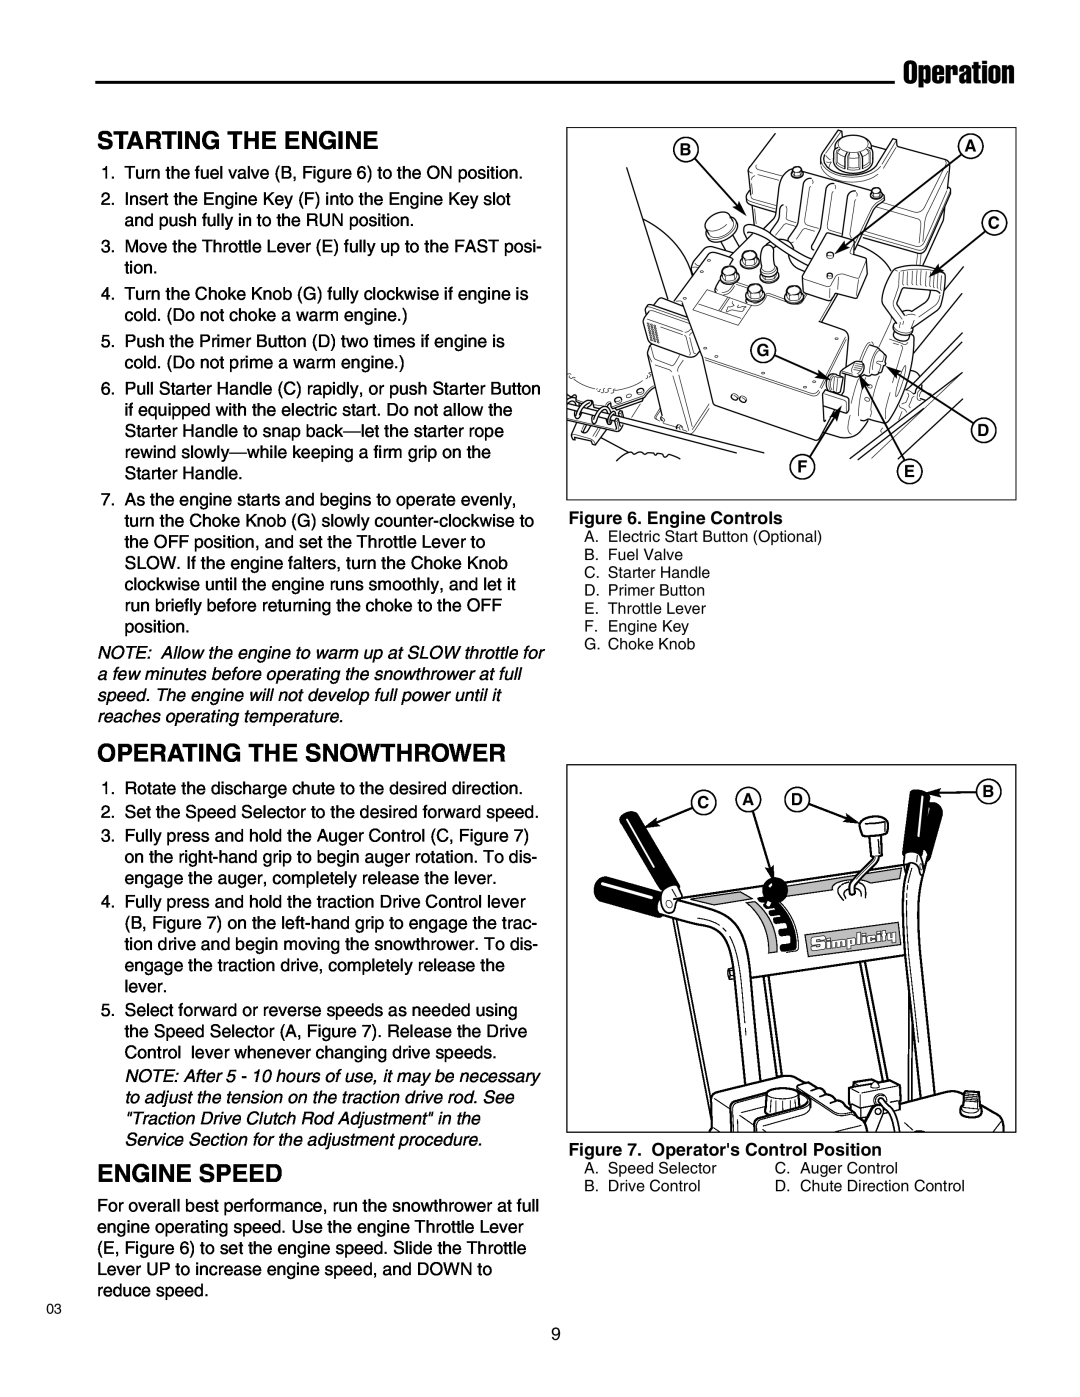 Simplicity 1693775 860M manual Starting The Engine, Operation, Operating The Snowthrower, Engine Speed, Engine Controls 